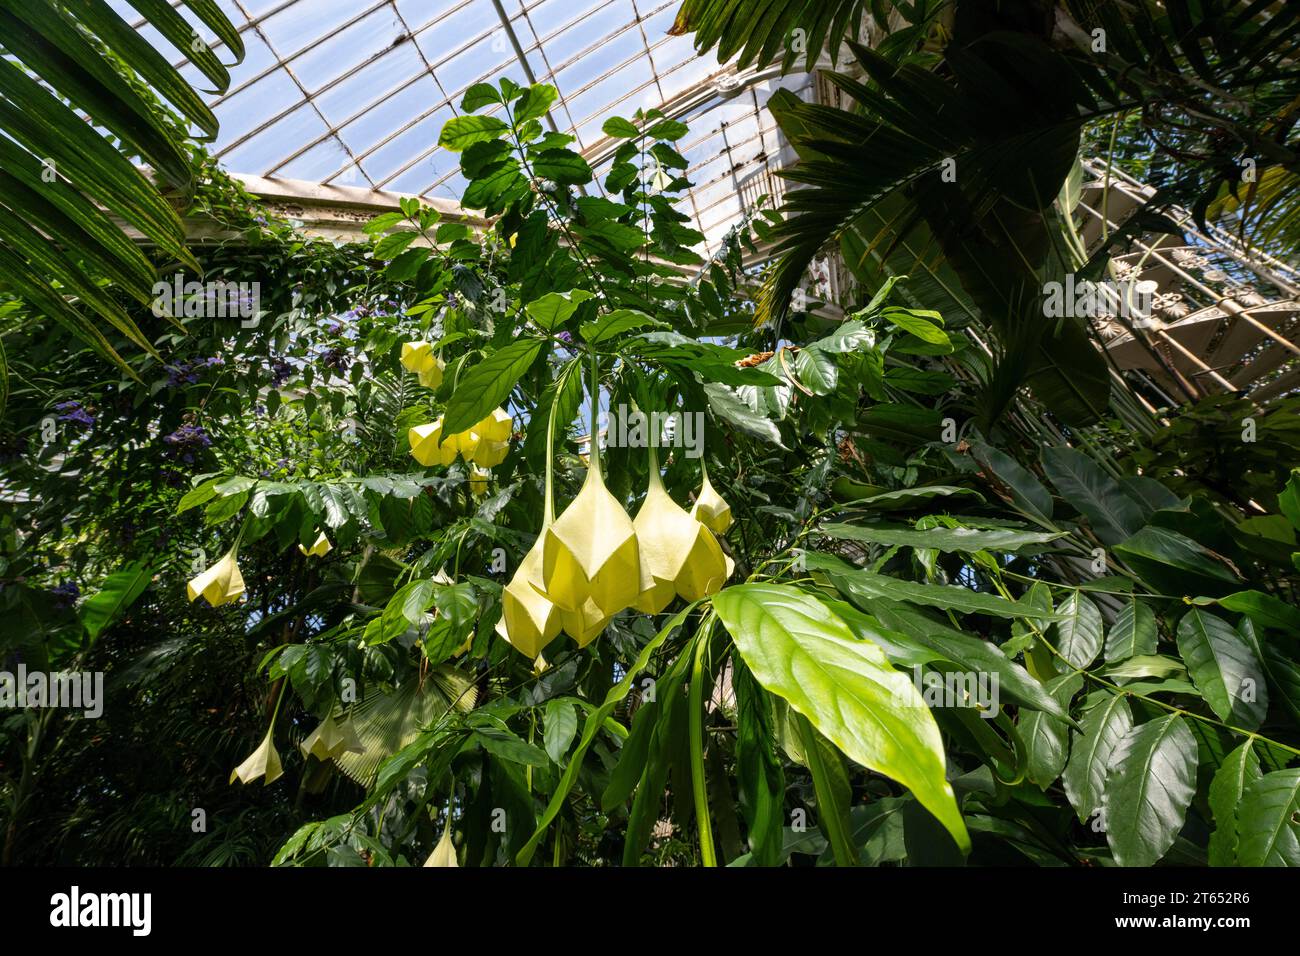 Angel's trumpet (Brugmansia), trumpet plant, Palm House, oldest Victorian greenhouse in the world, Royal Botanic Gardens, Kew, London, England, Great Stock Photo